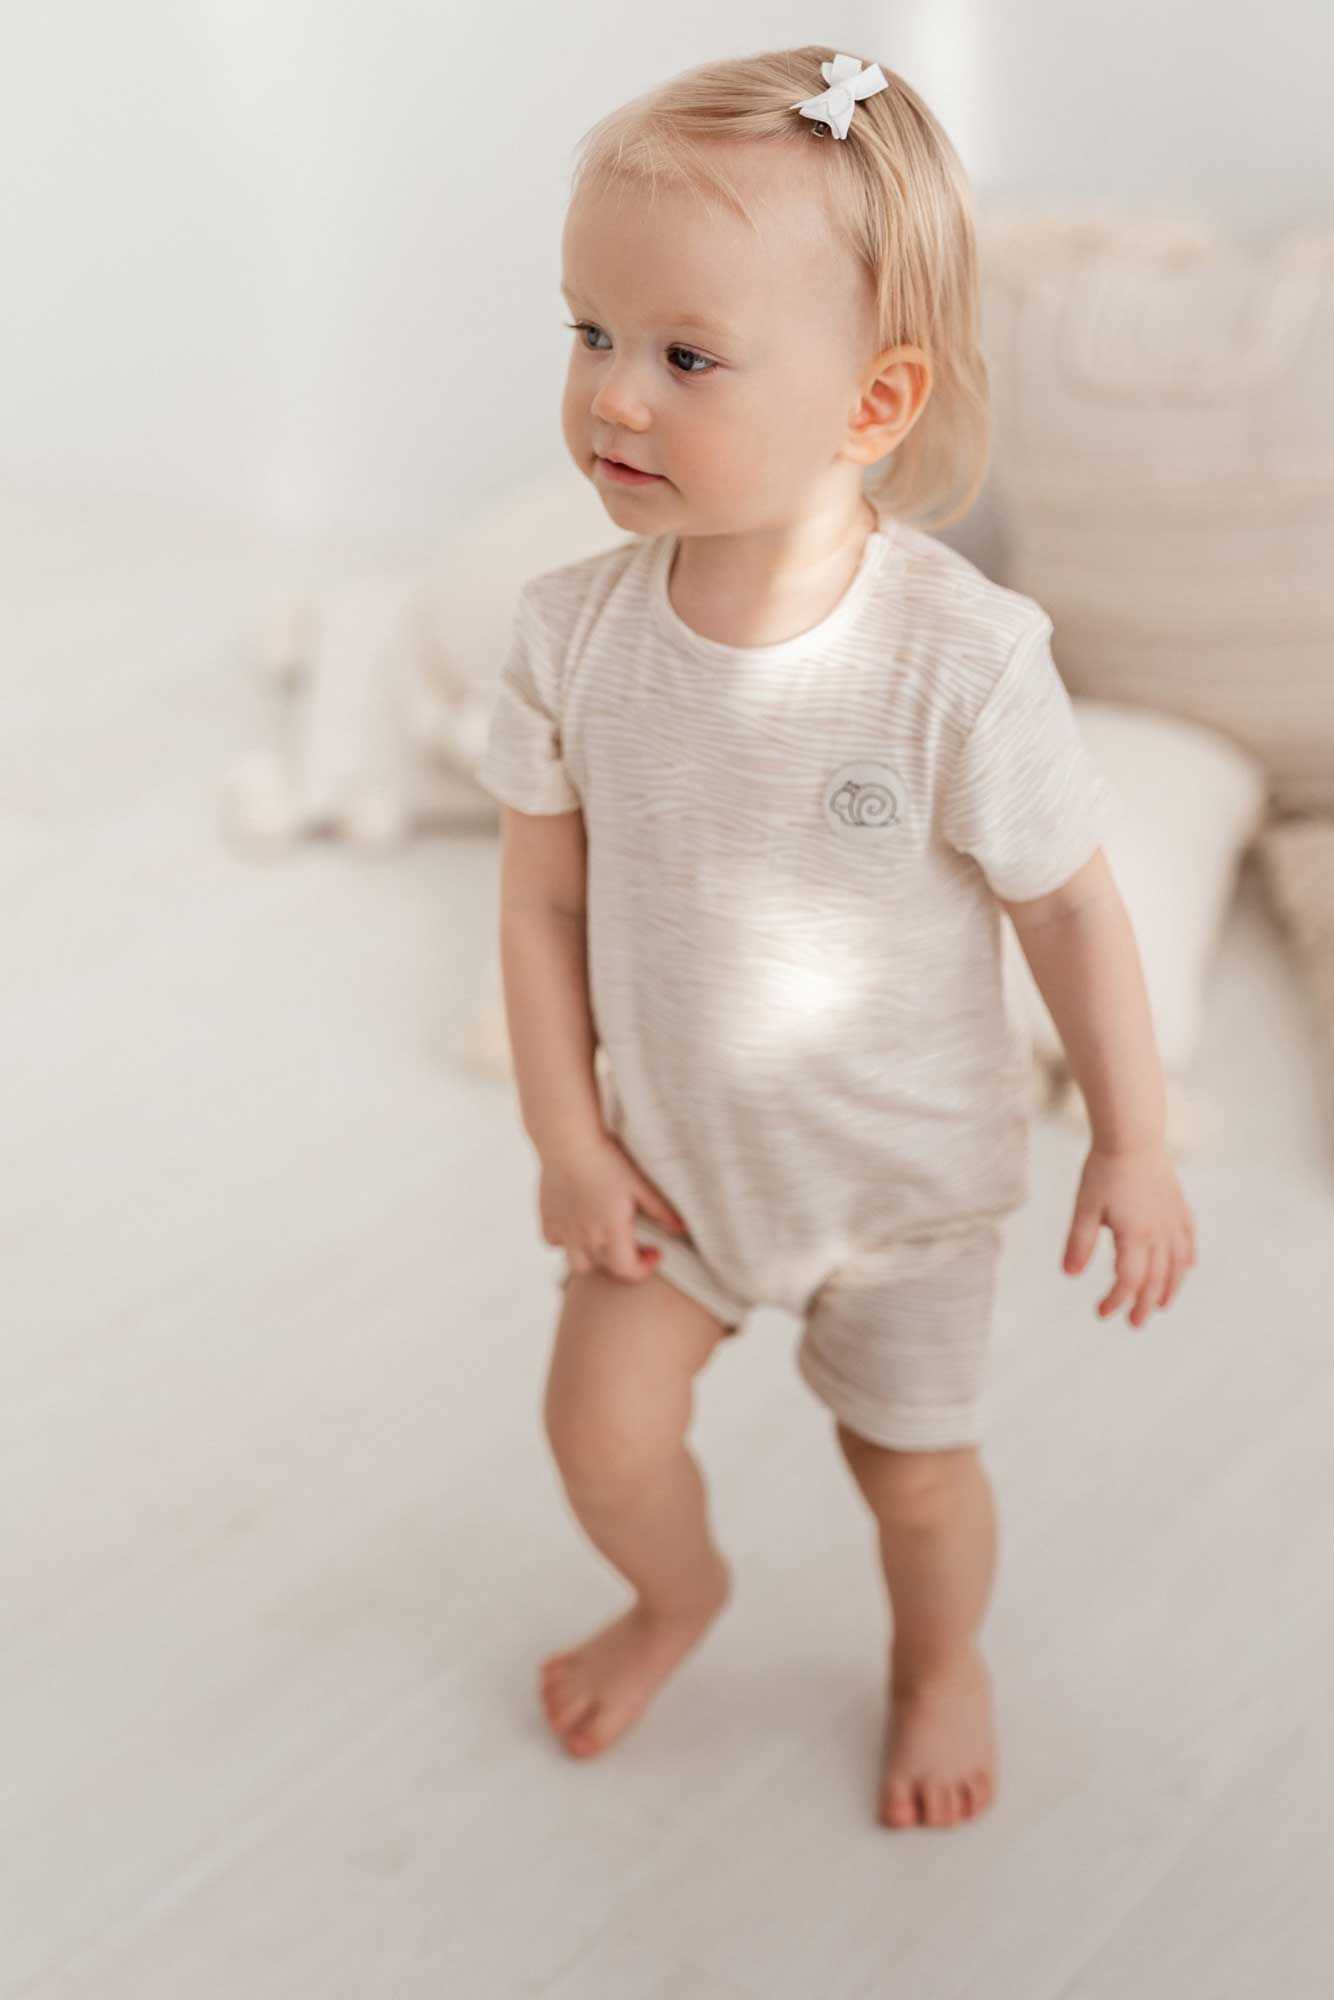 A happy child enjoying his overall with snail print